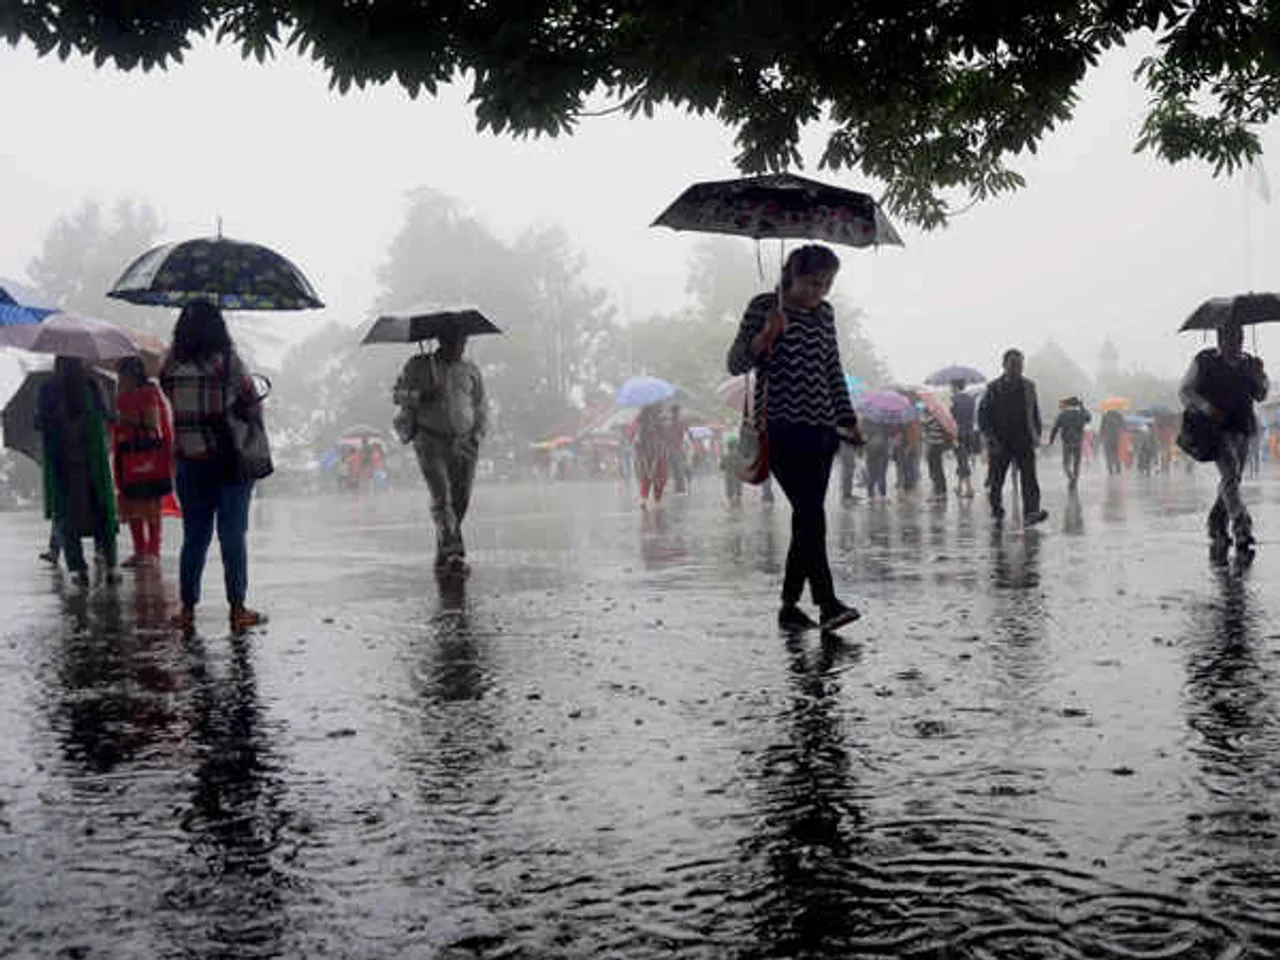 North India likely to experience rains due to western disturbance: IMD